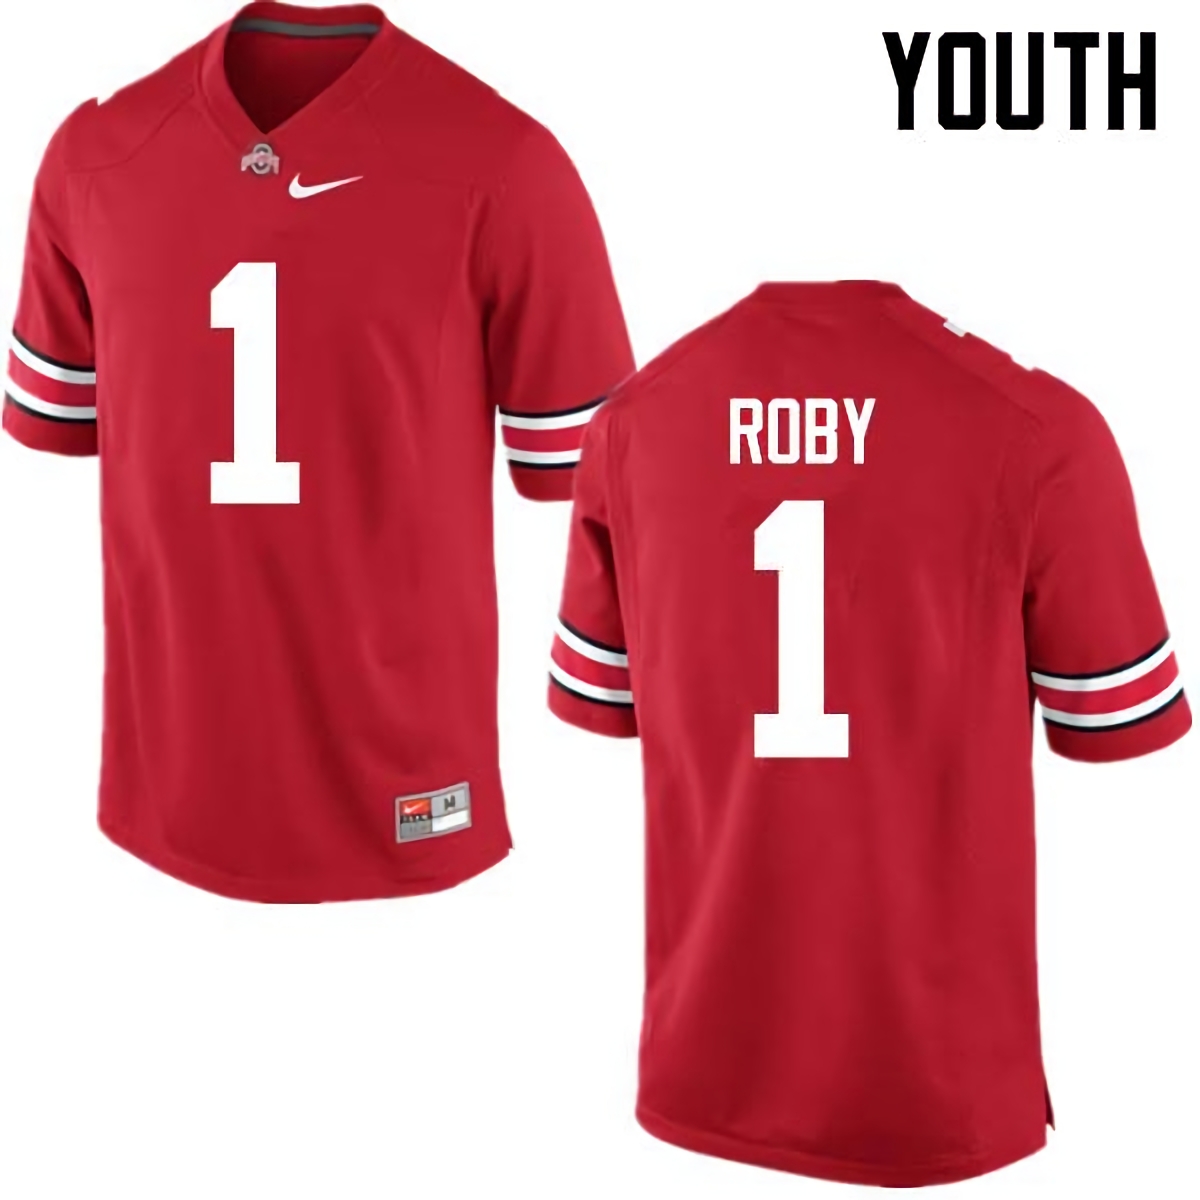 Bradley Roby Ohio State Buckeyes Youth NCAA #1 Nike Red College Stitched Football Jersey IBI3556BV